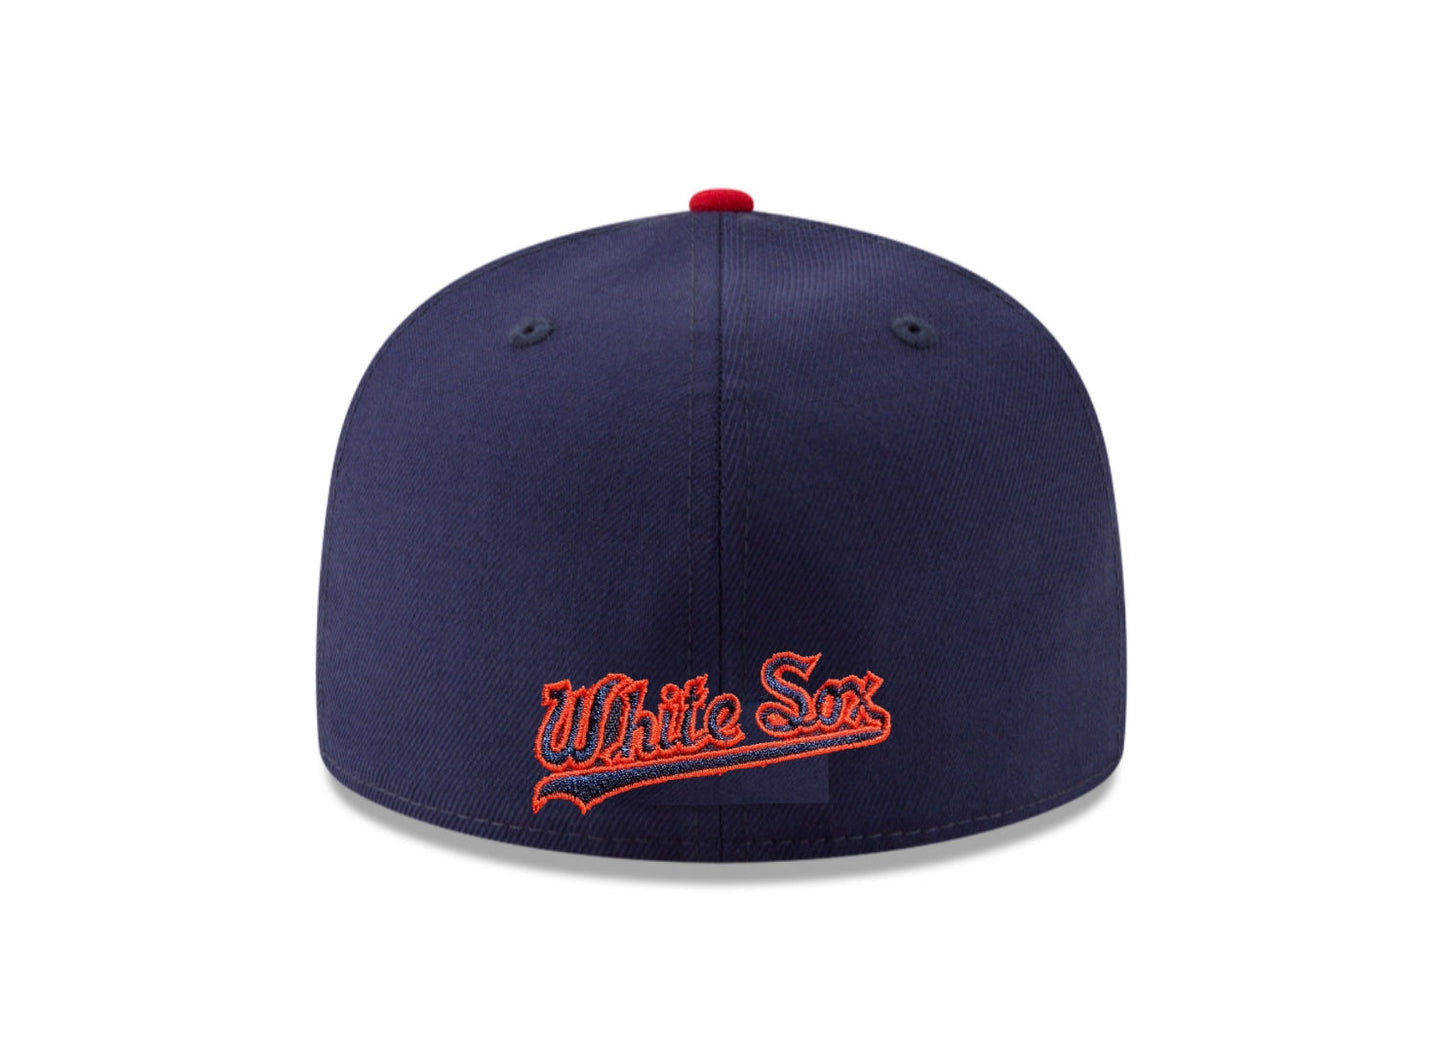 Chicago White Sox New Era Cooperstown Collection 1987 Cooperstown Navy/Red 59FIFTY Fitted Hat